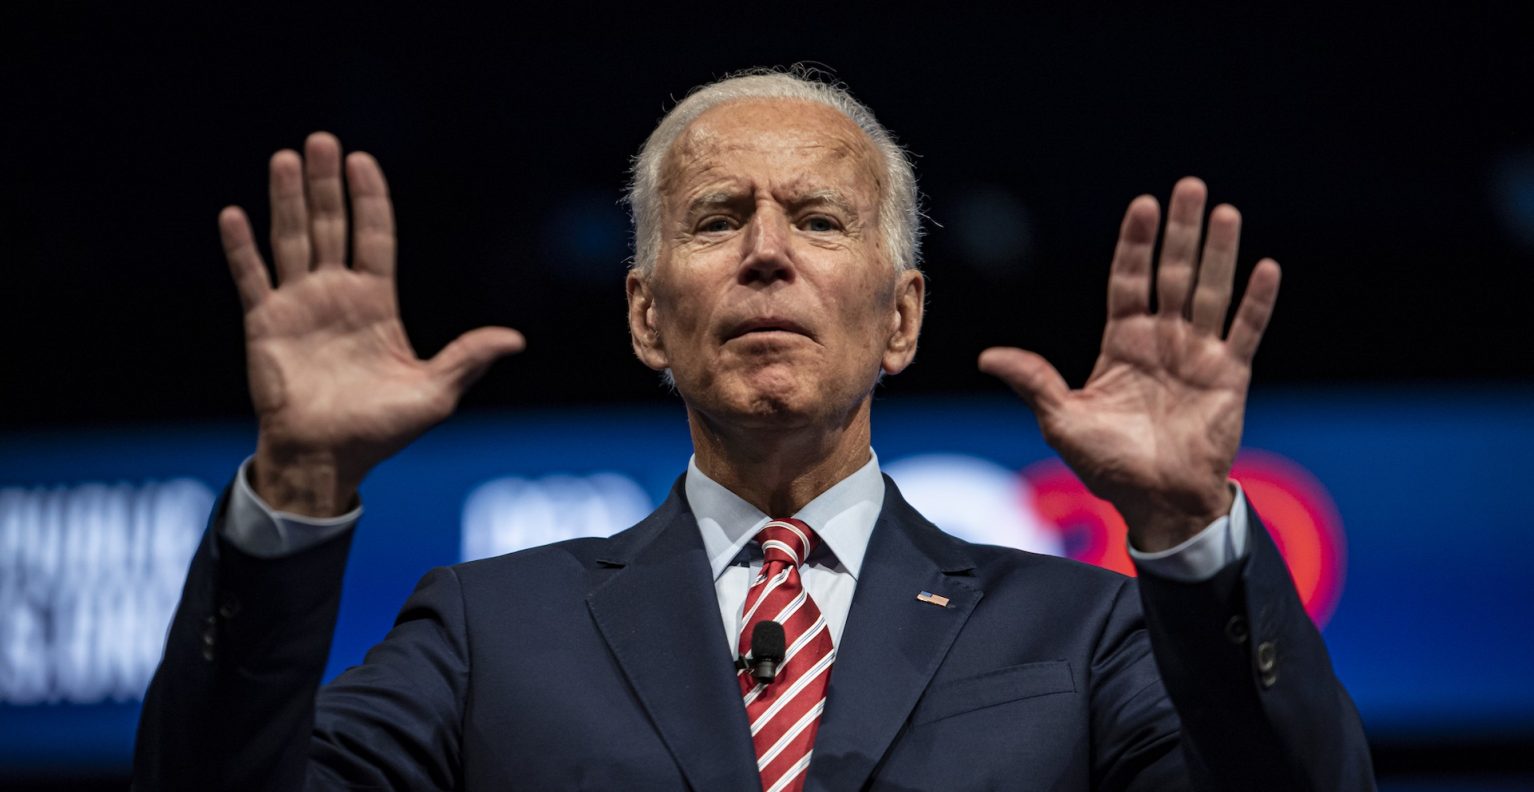 Biden’s Cannabis Reform Plan Would Only Make Weed a Schedule 2 Substance